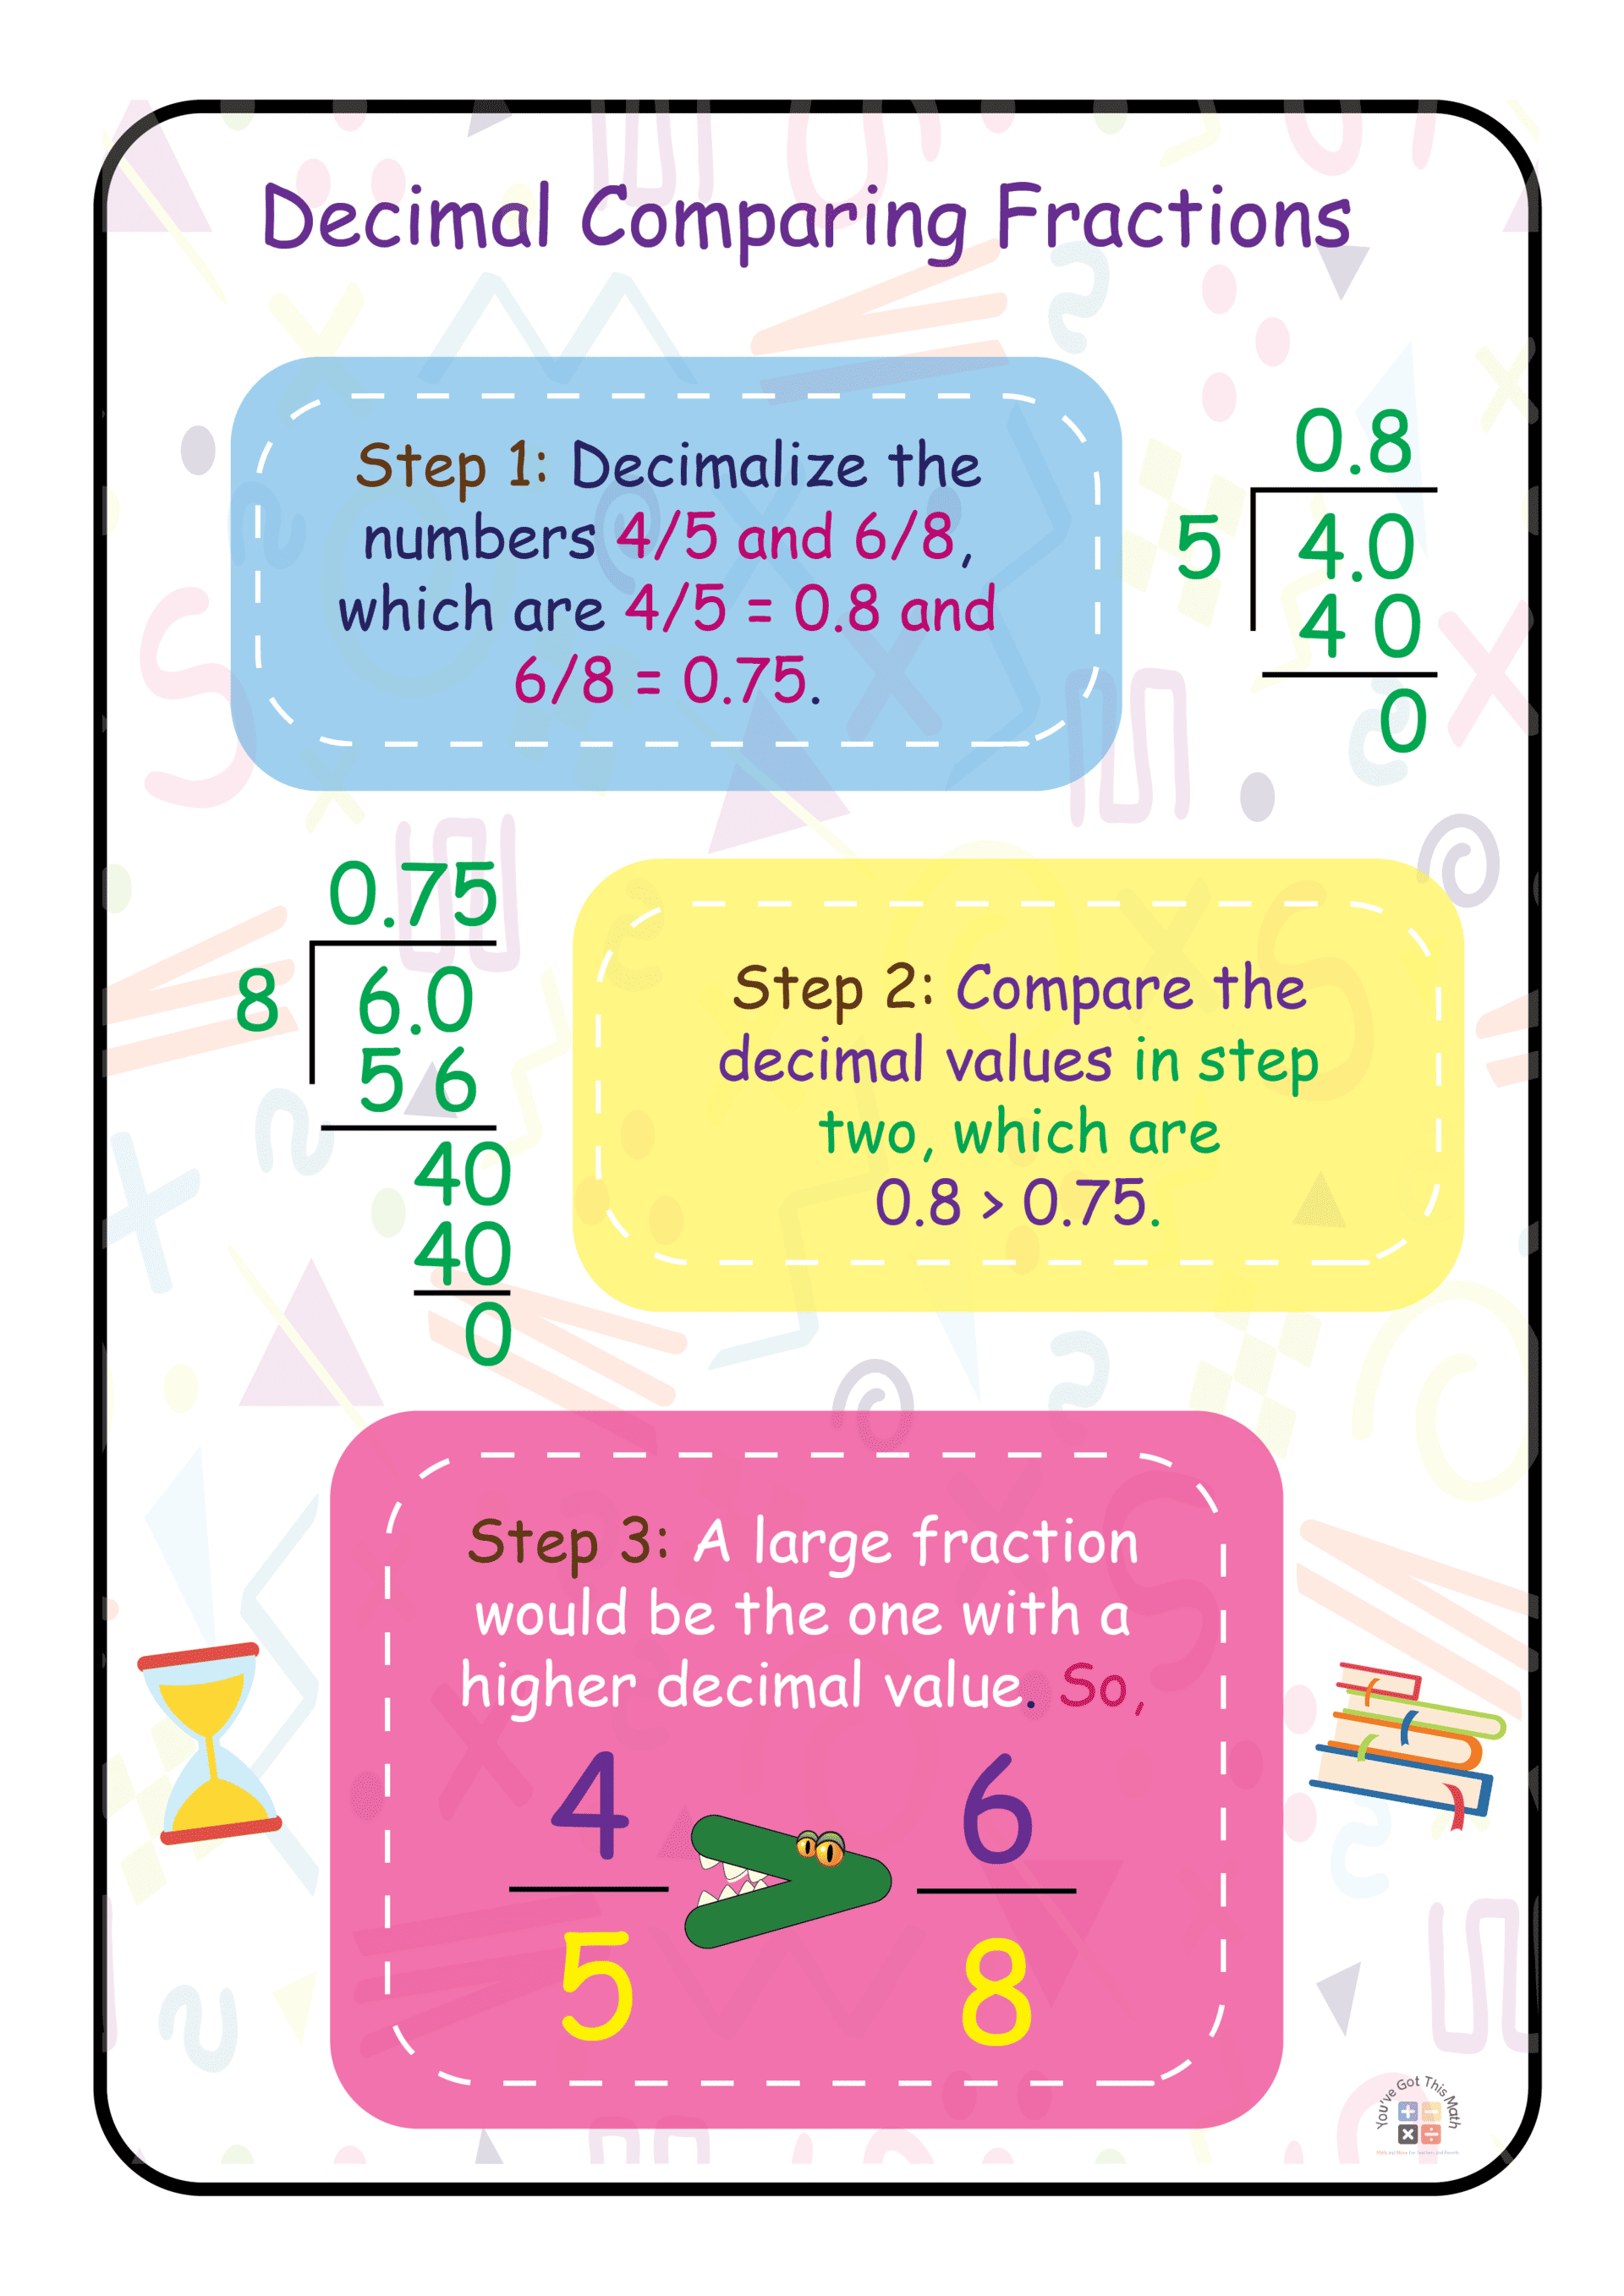 Comparing Fractions with the Help of Decimals